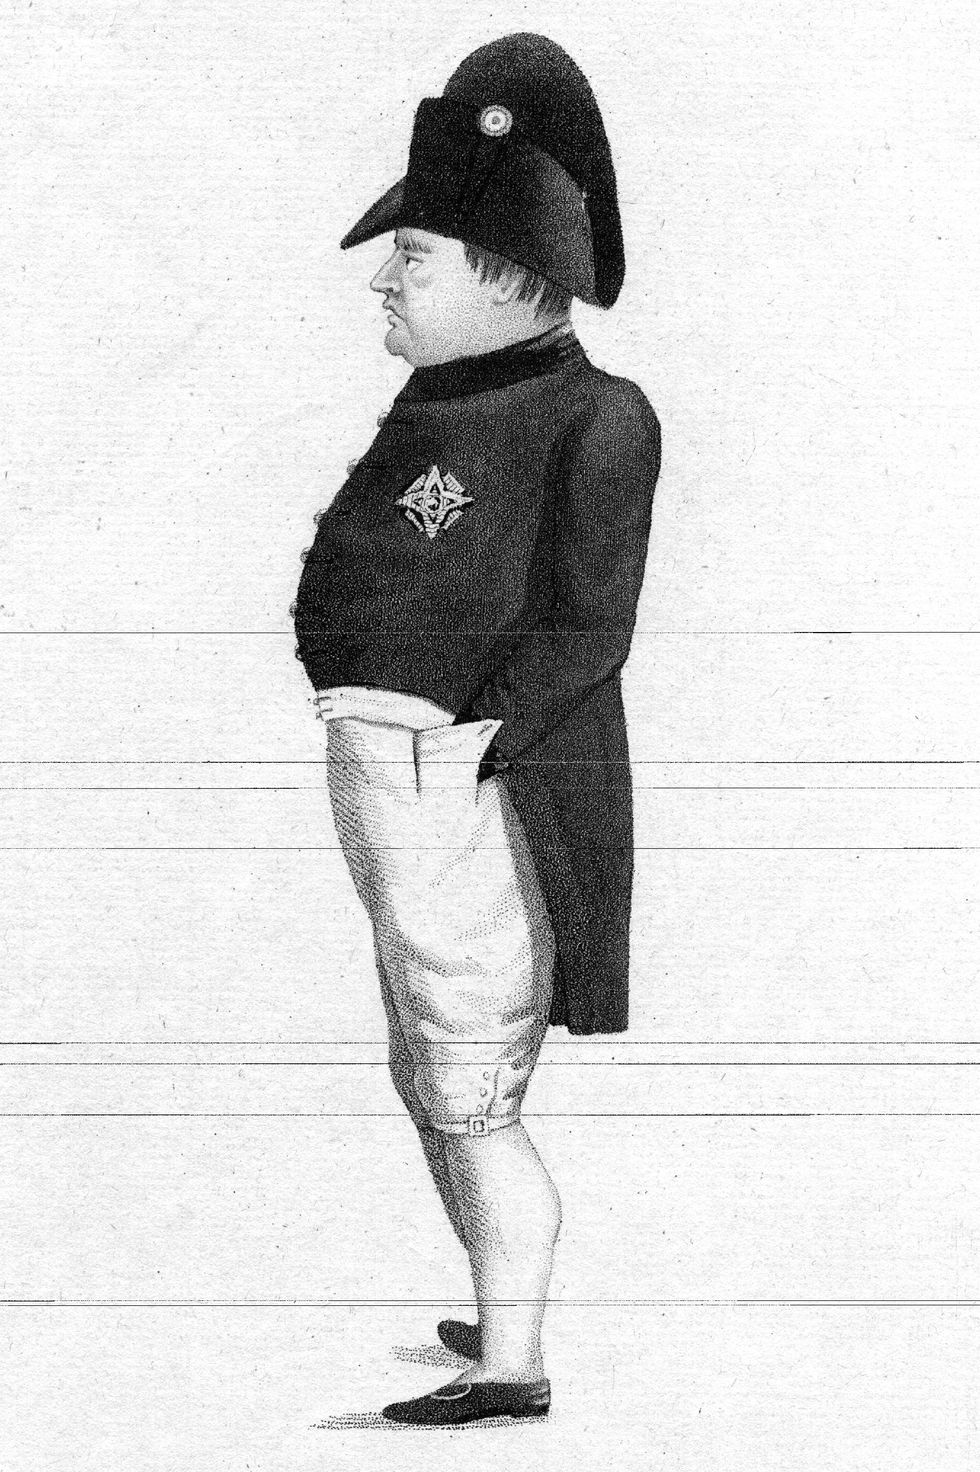 drawing of napoleon bonaparte standing in profile wearing a large hat, coat with tails and knee length pants